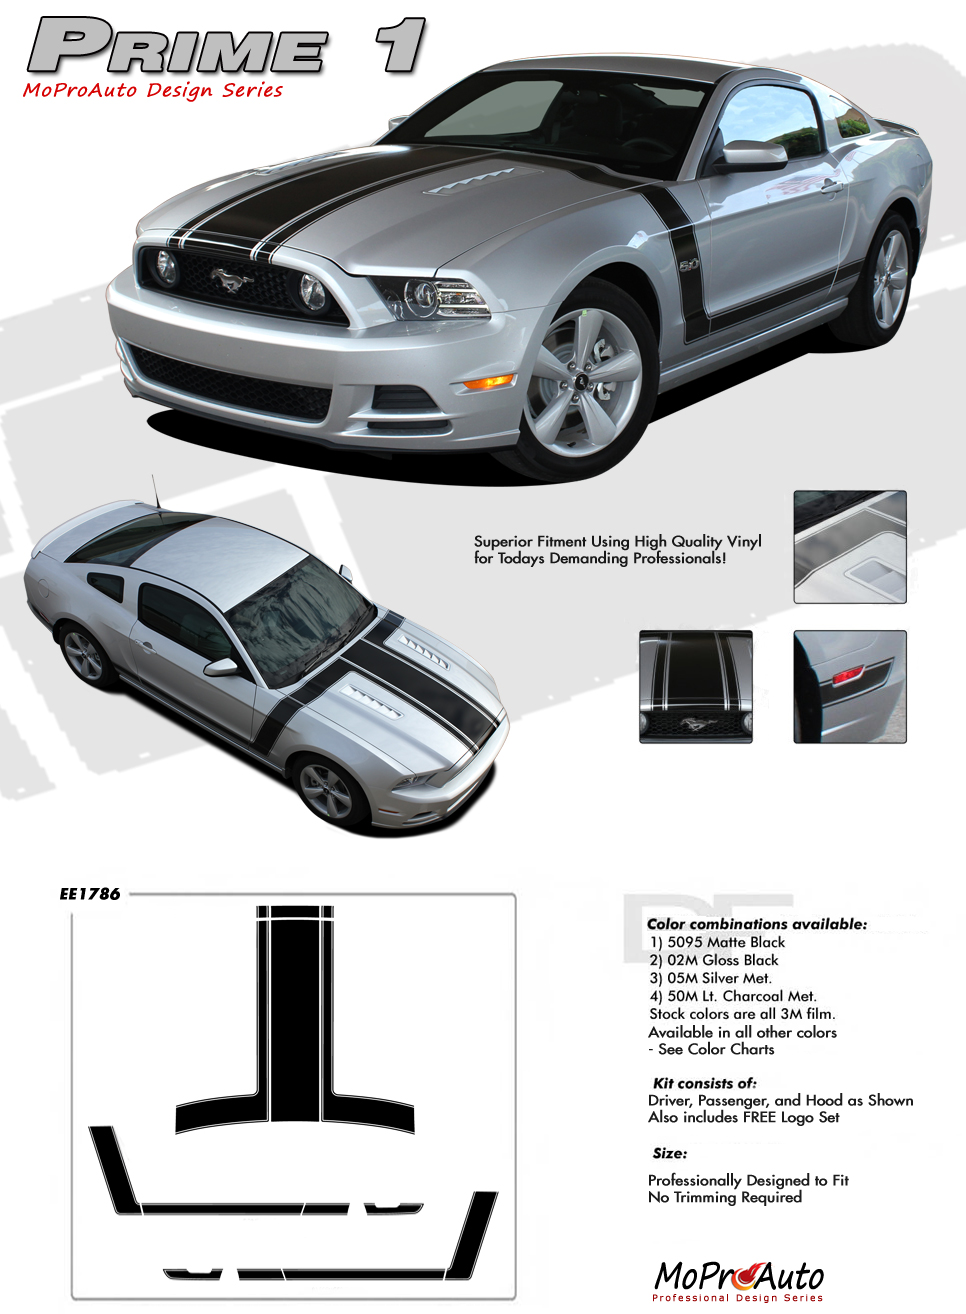 PRIME 1 Ford Mustang - MoProAuto Pro Design Series Vinyl Graphics, Stripes and Decals Kit